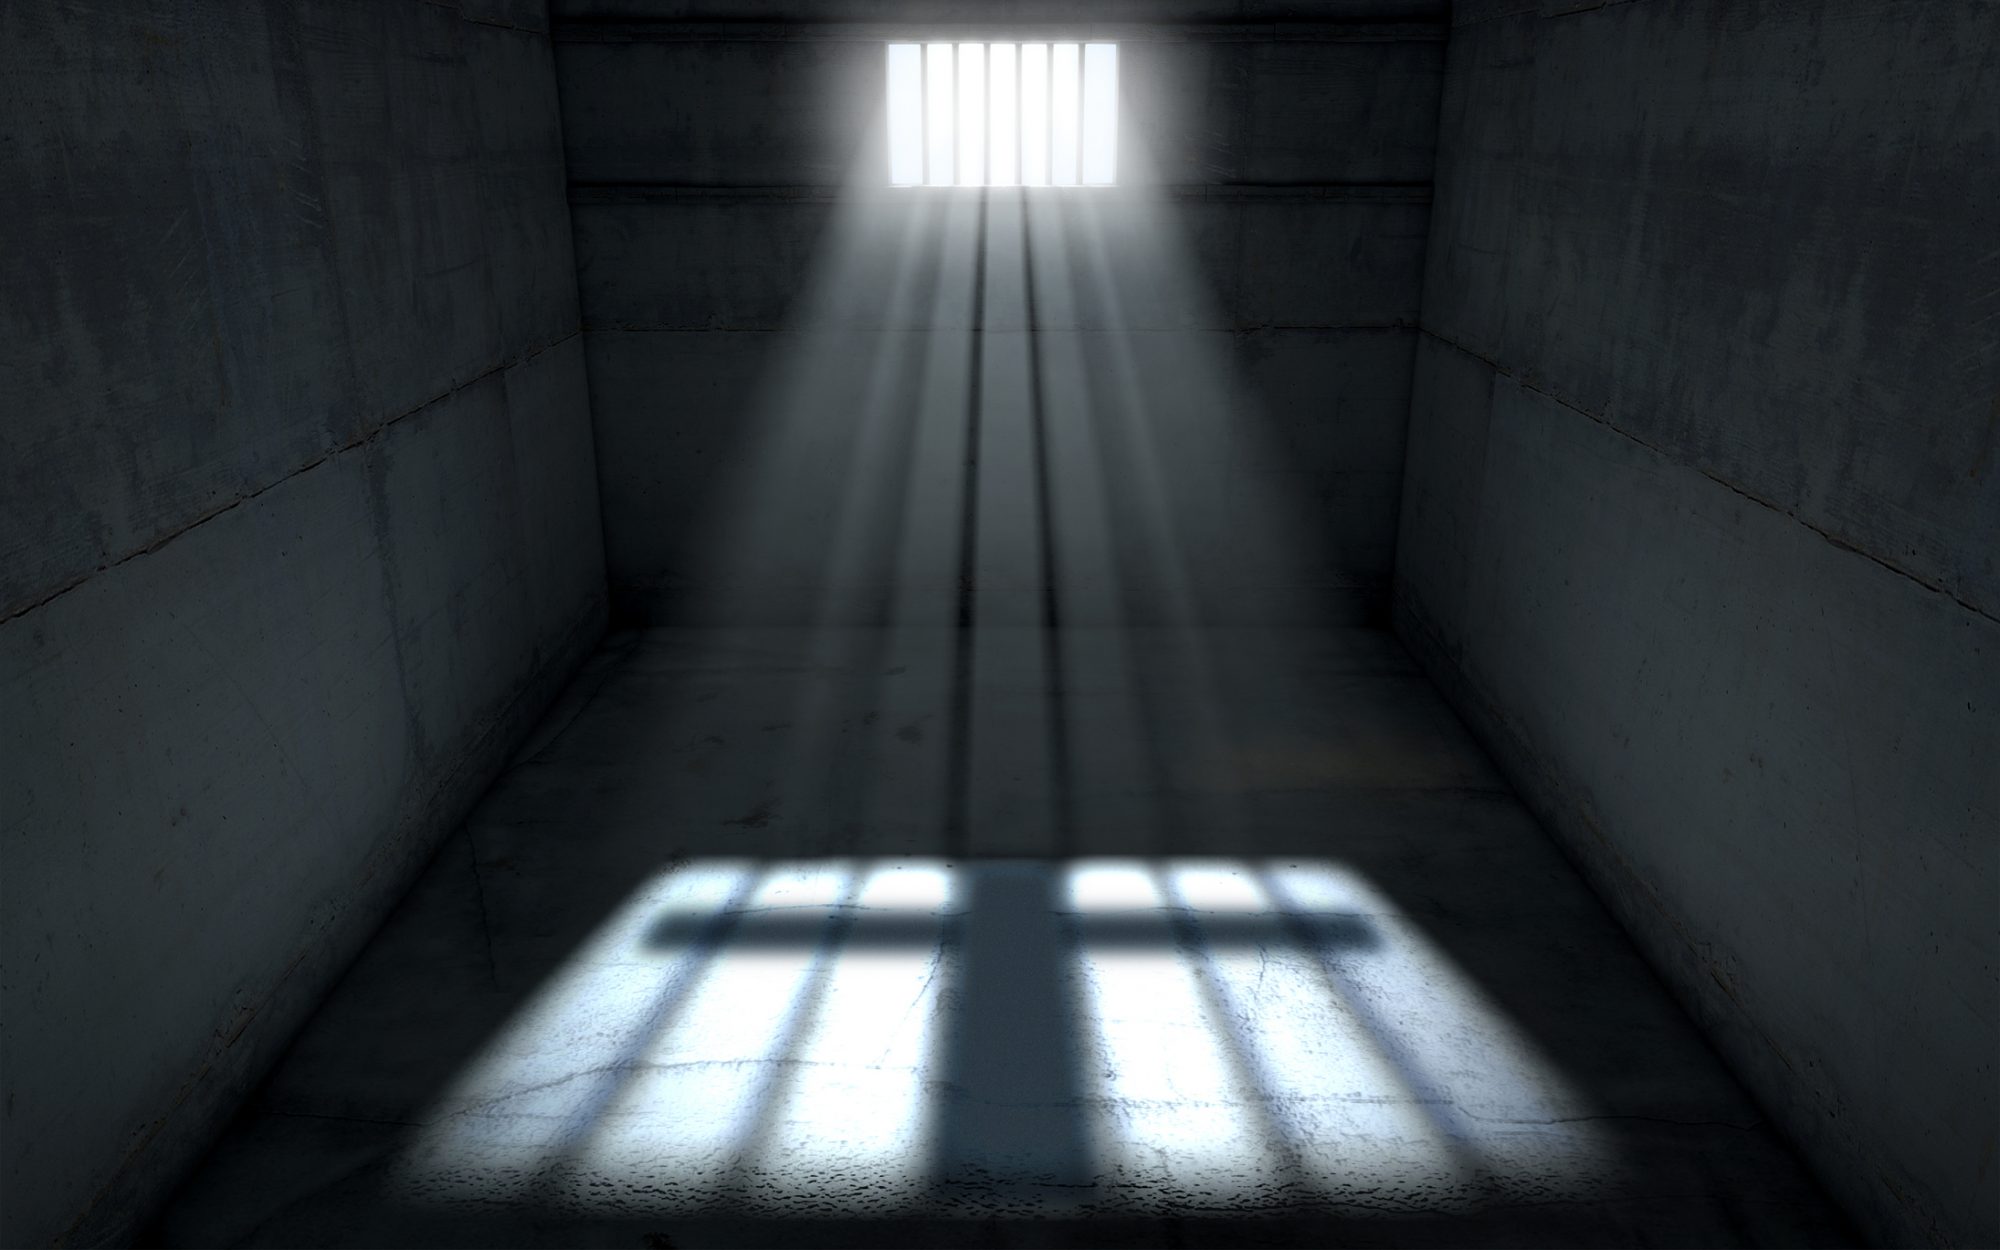 A jail cell interior with a barred up window and light rays penetrating through it casting an image of a crucifix - 3D render